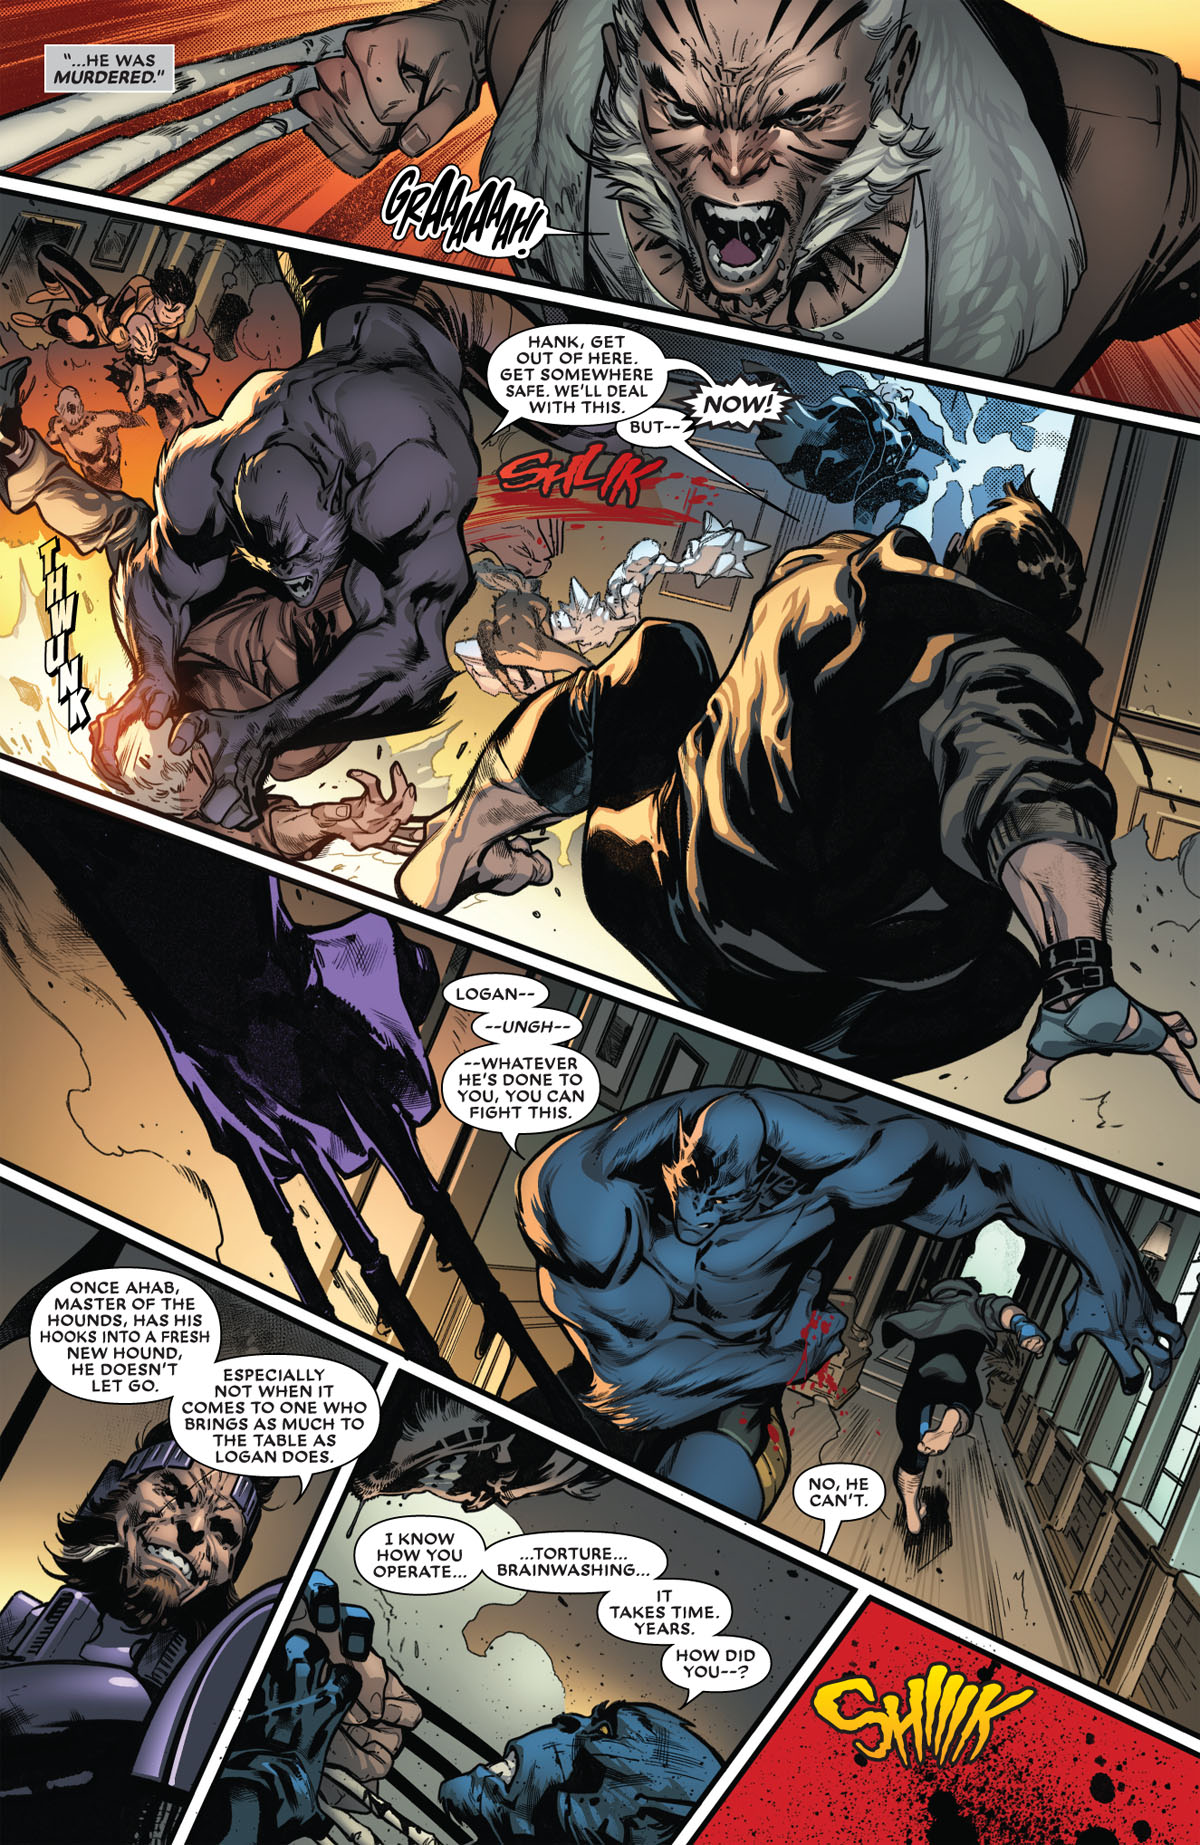 Extermination #3 page 3